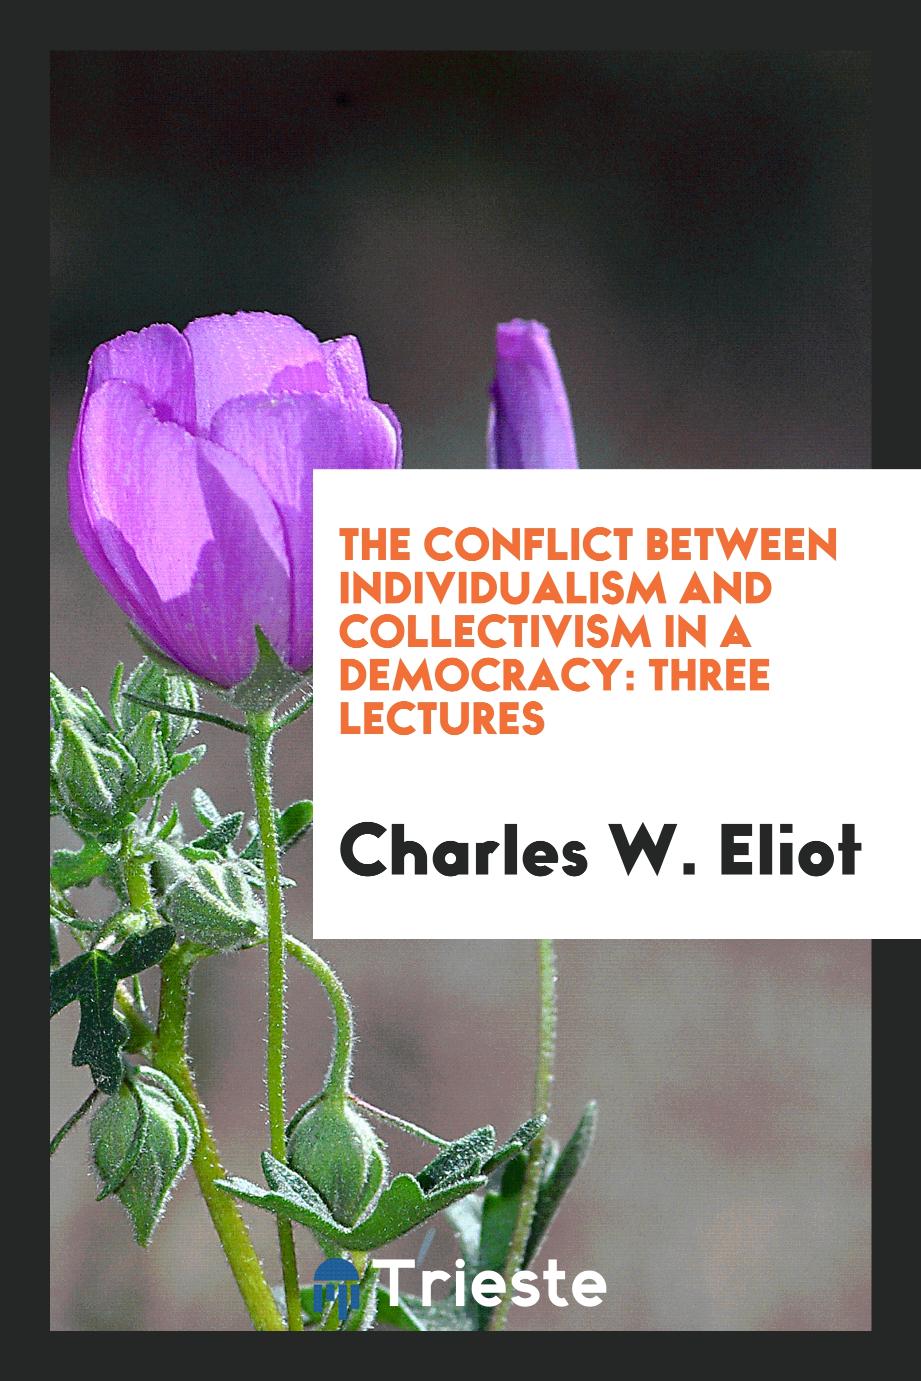 The Conflict Between Individualism and Collectivism in a Democracy: Three Lectures